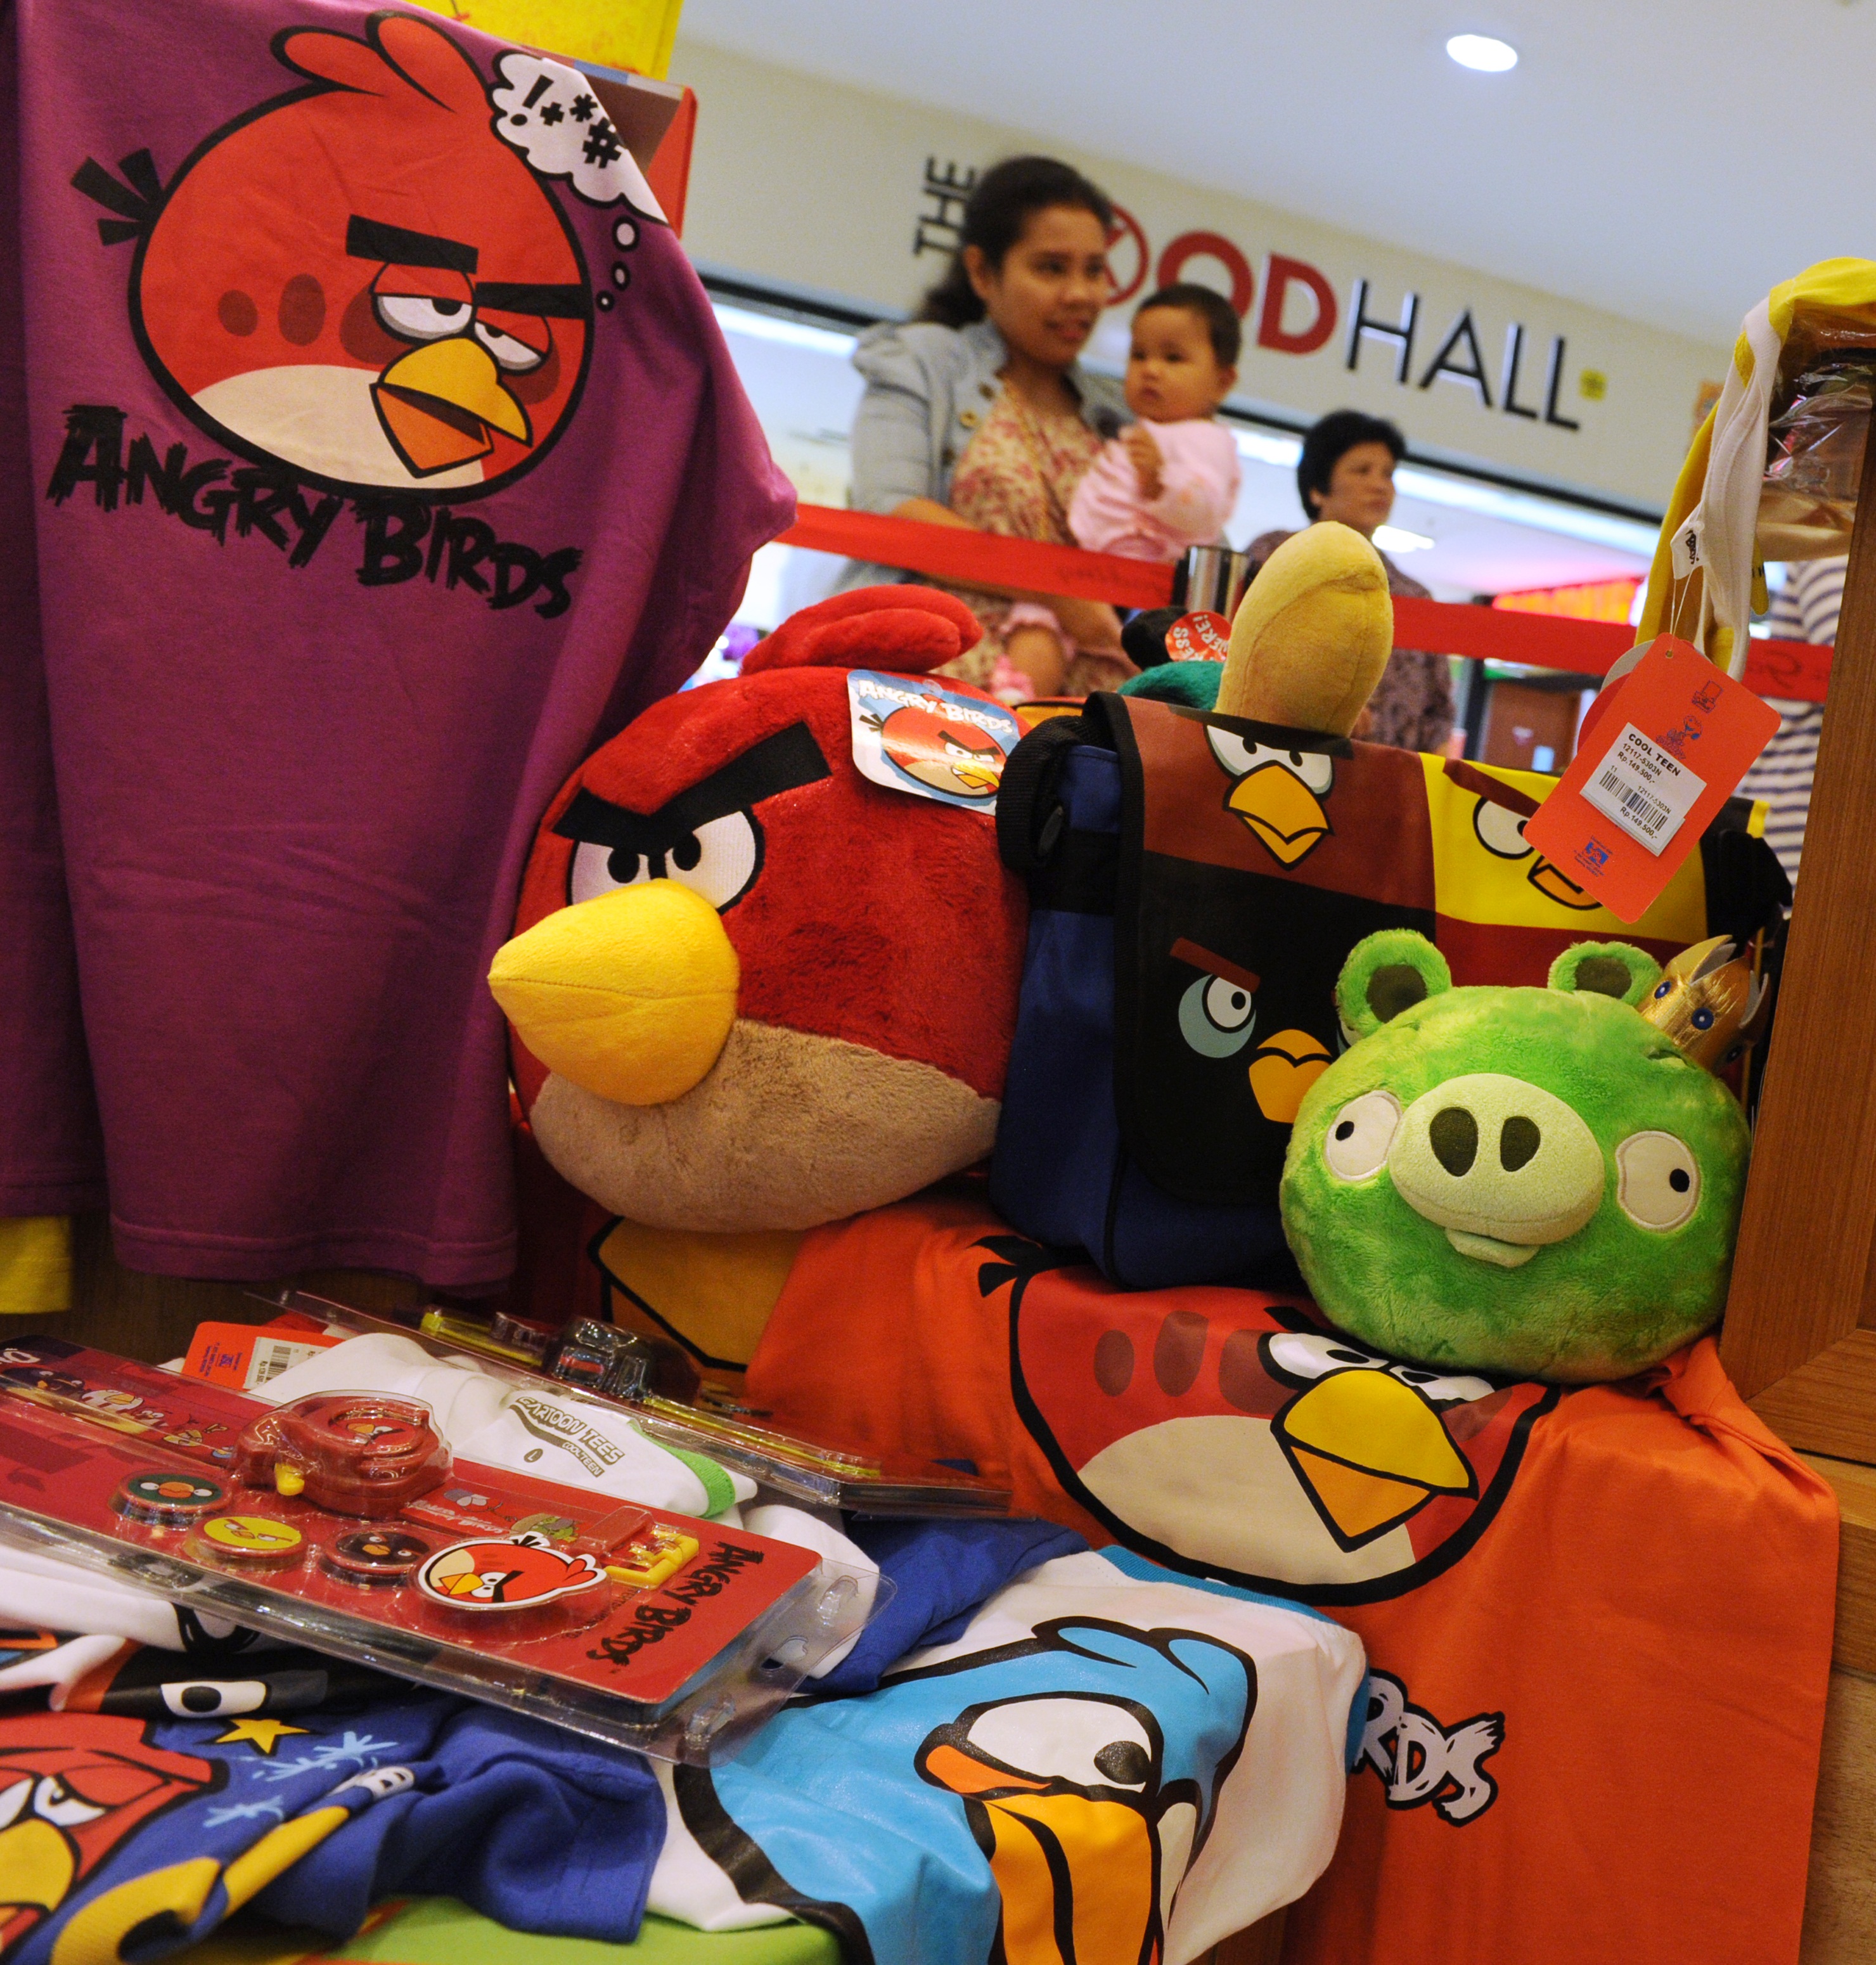 "Angry Birds" merchandise displayed in Jakarta, Indonesia in 2012.